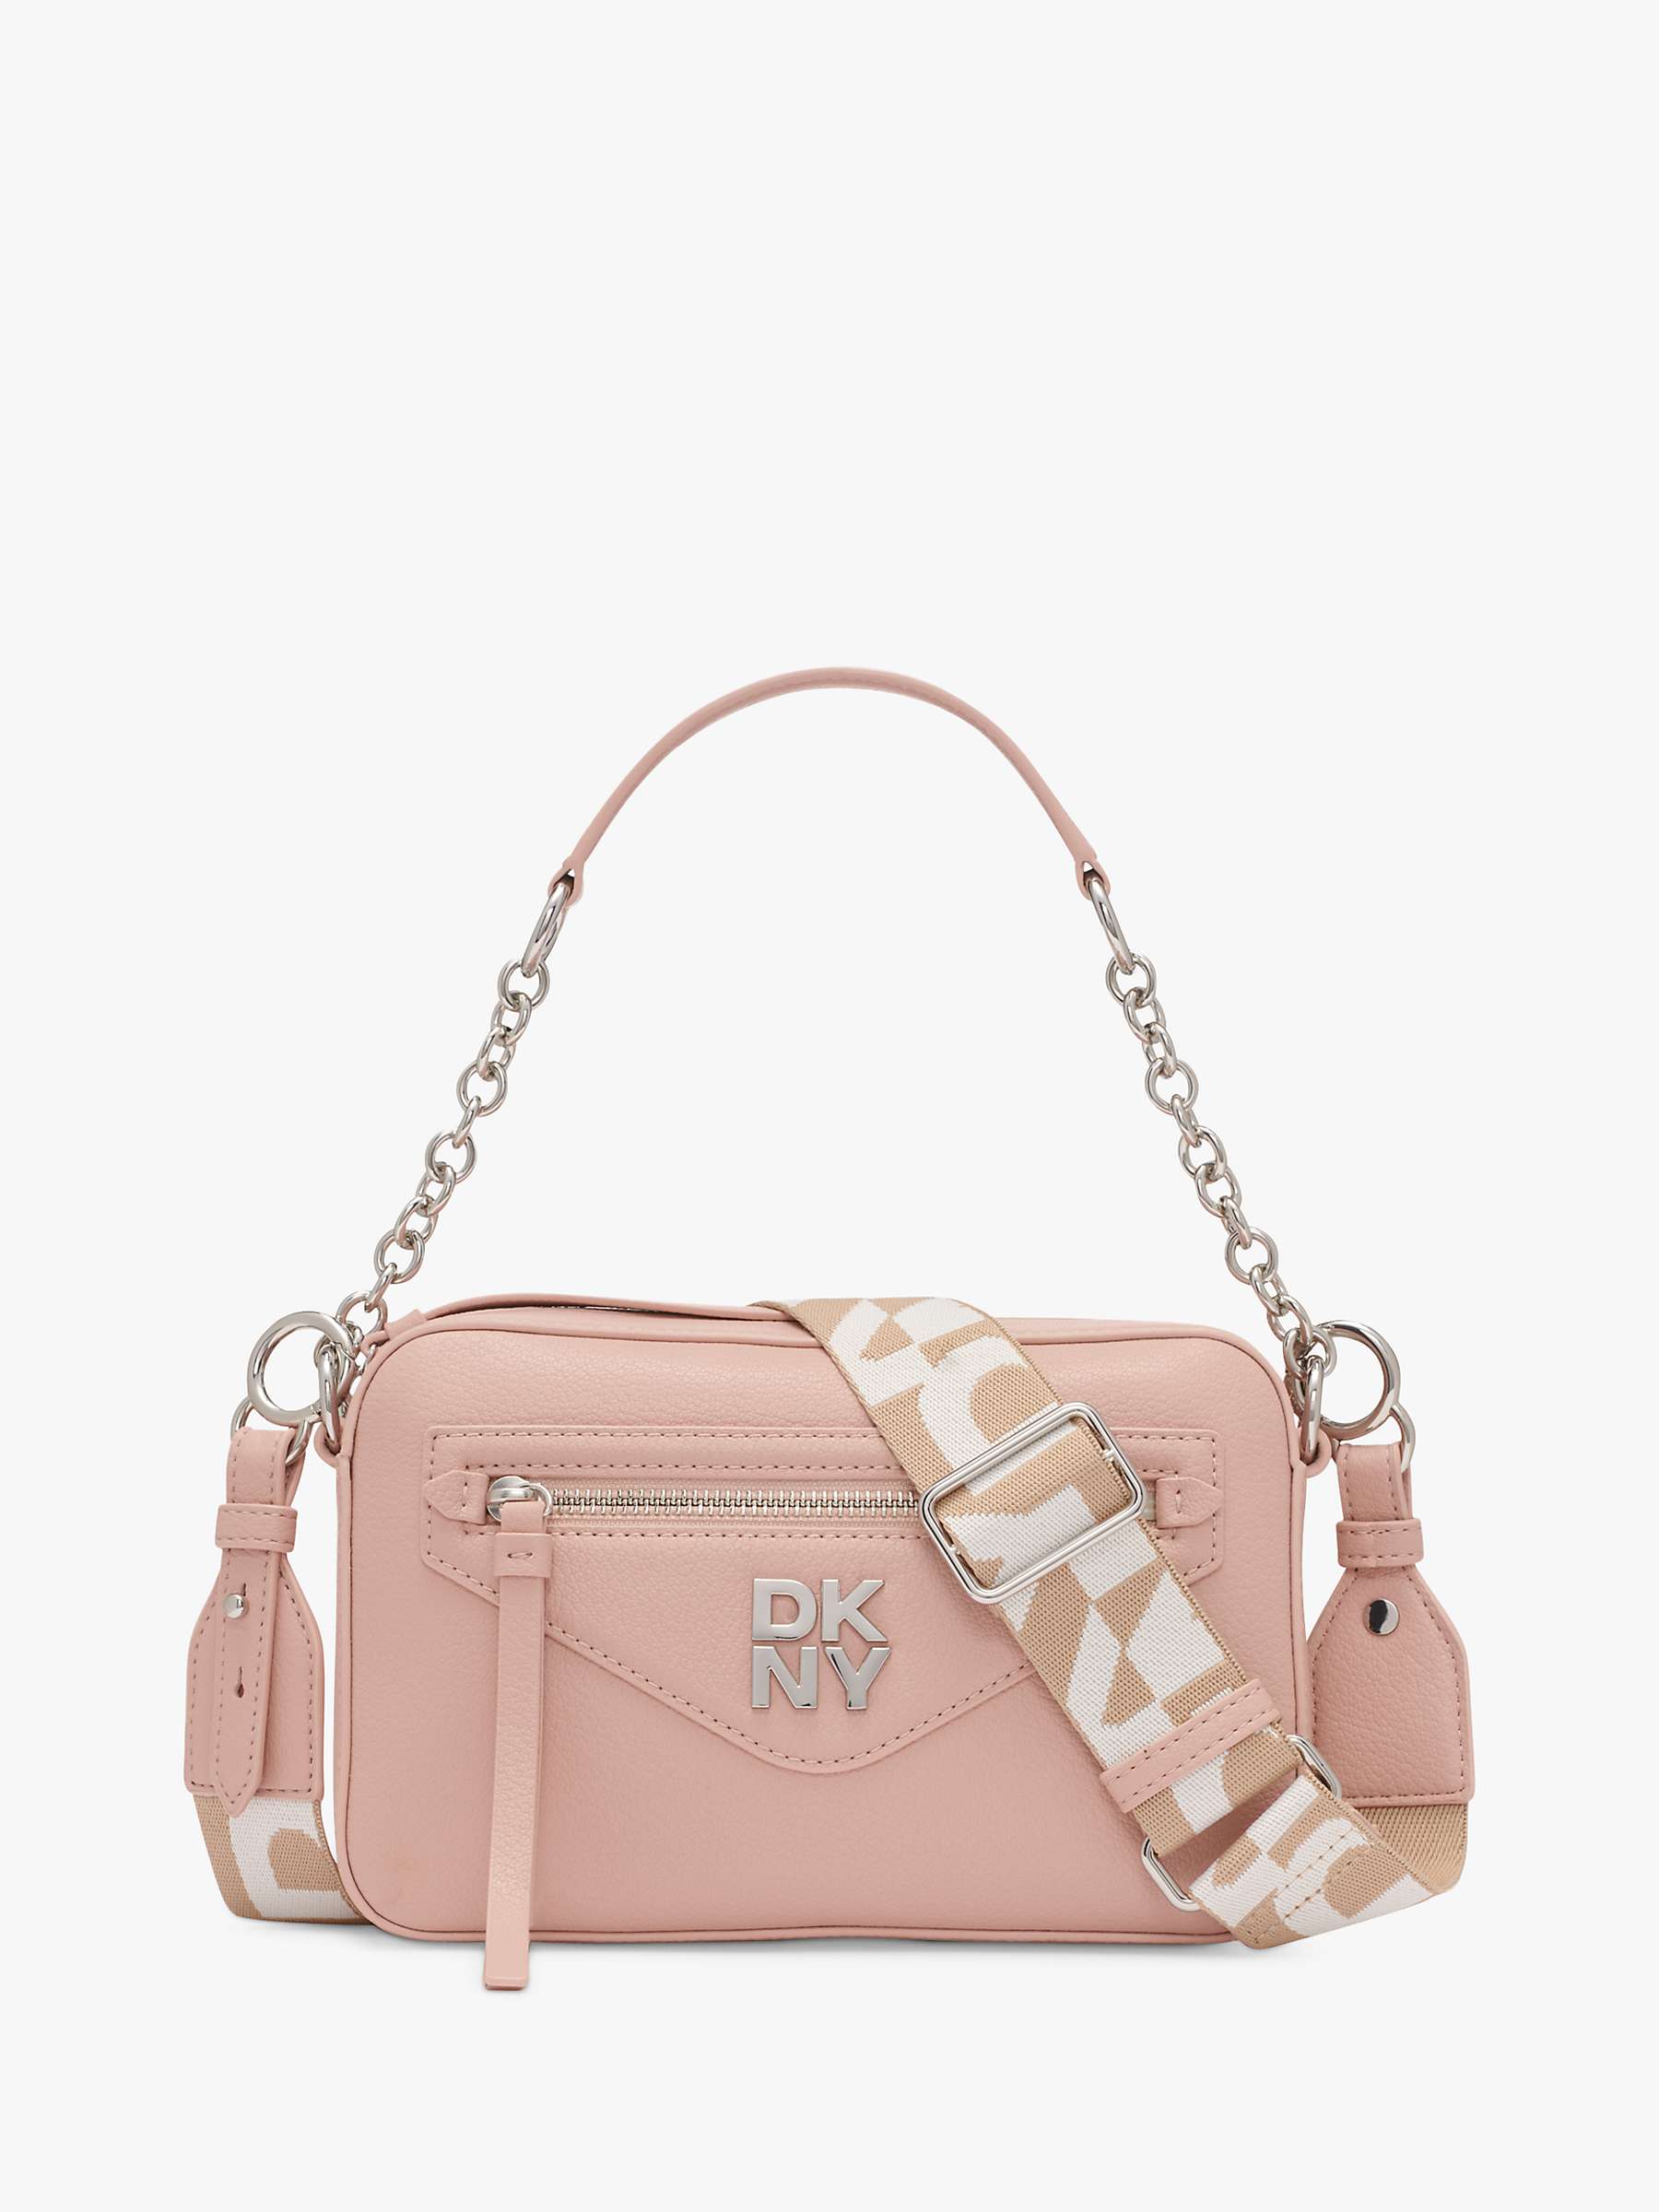 Buy DKNY Greenpoint Leather Camera Bag, Nude Online at johnlewis.com